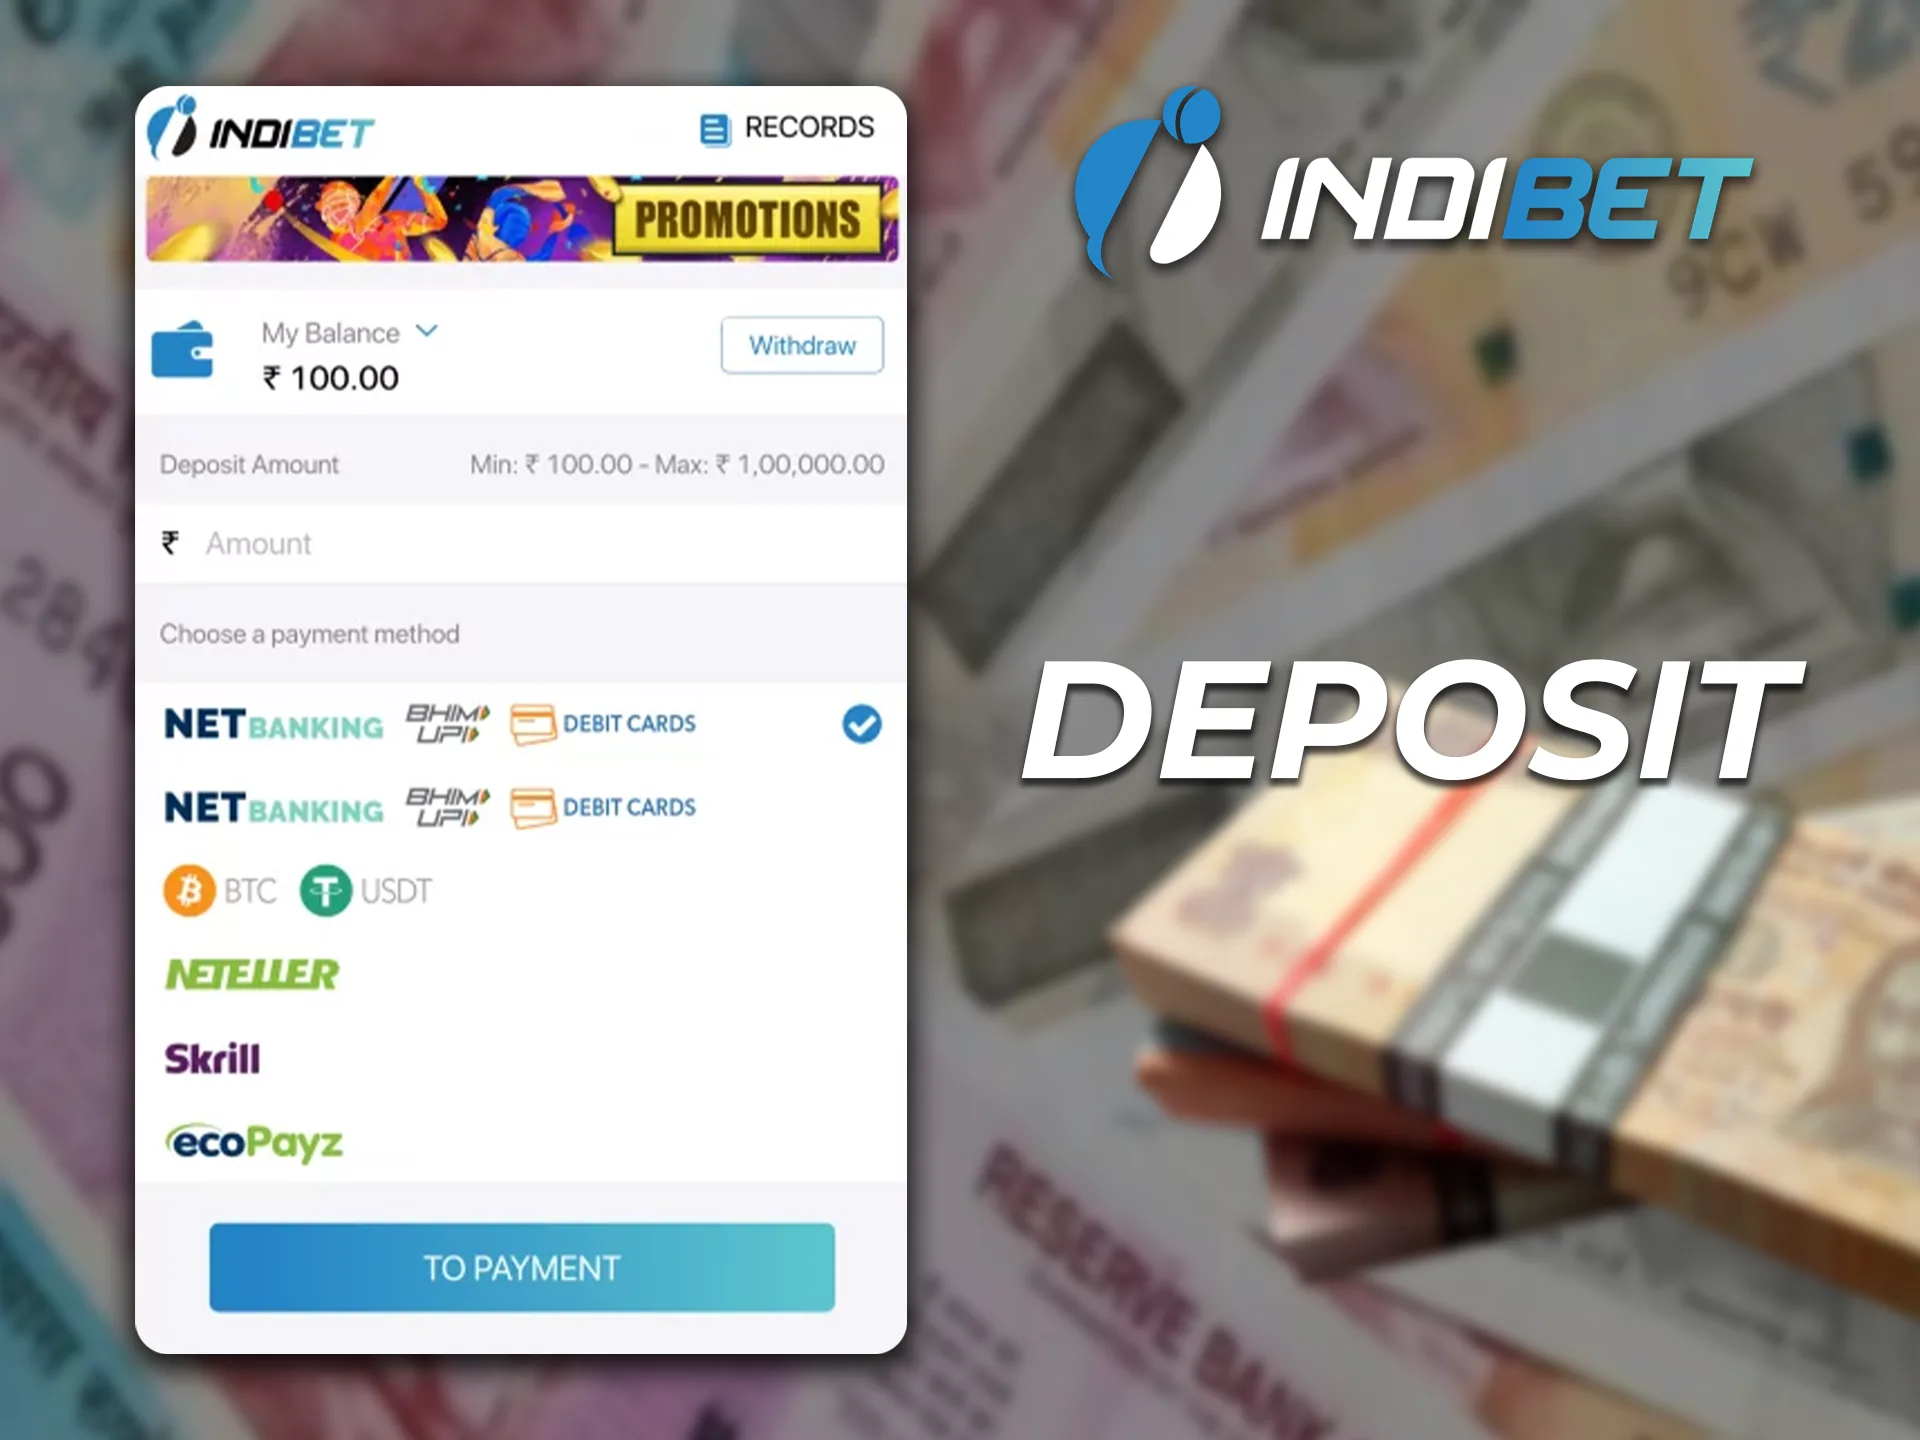 To make a deposit select one of the deposit methods and enter the amount.